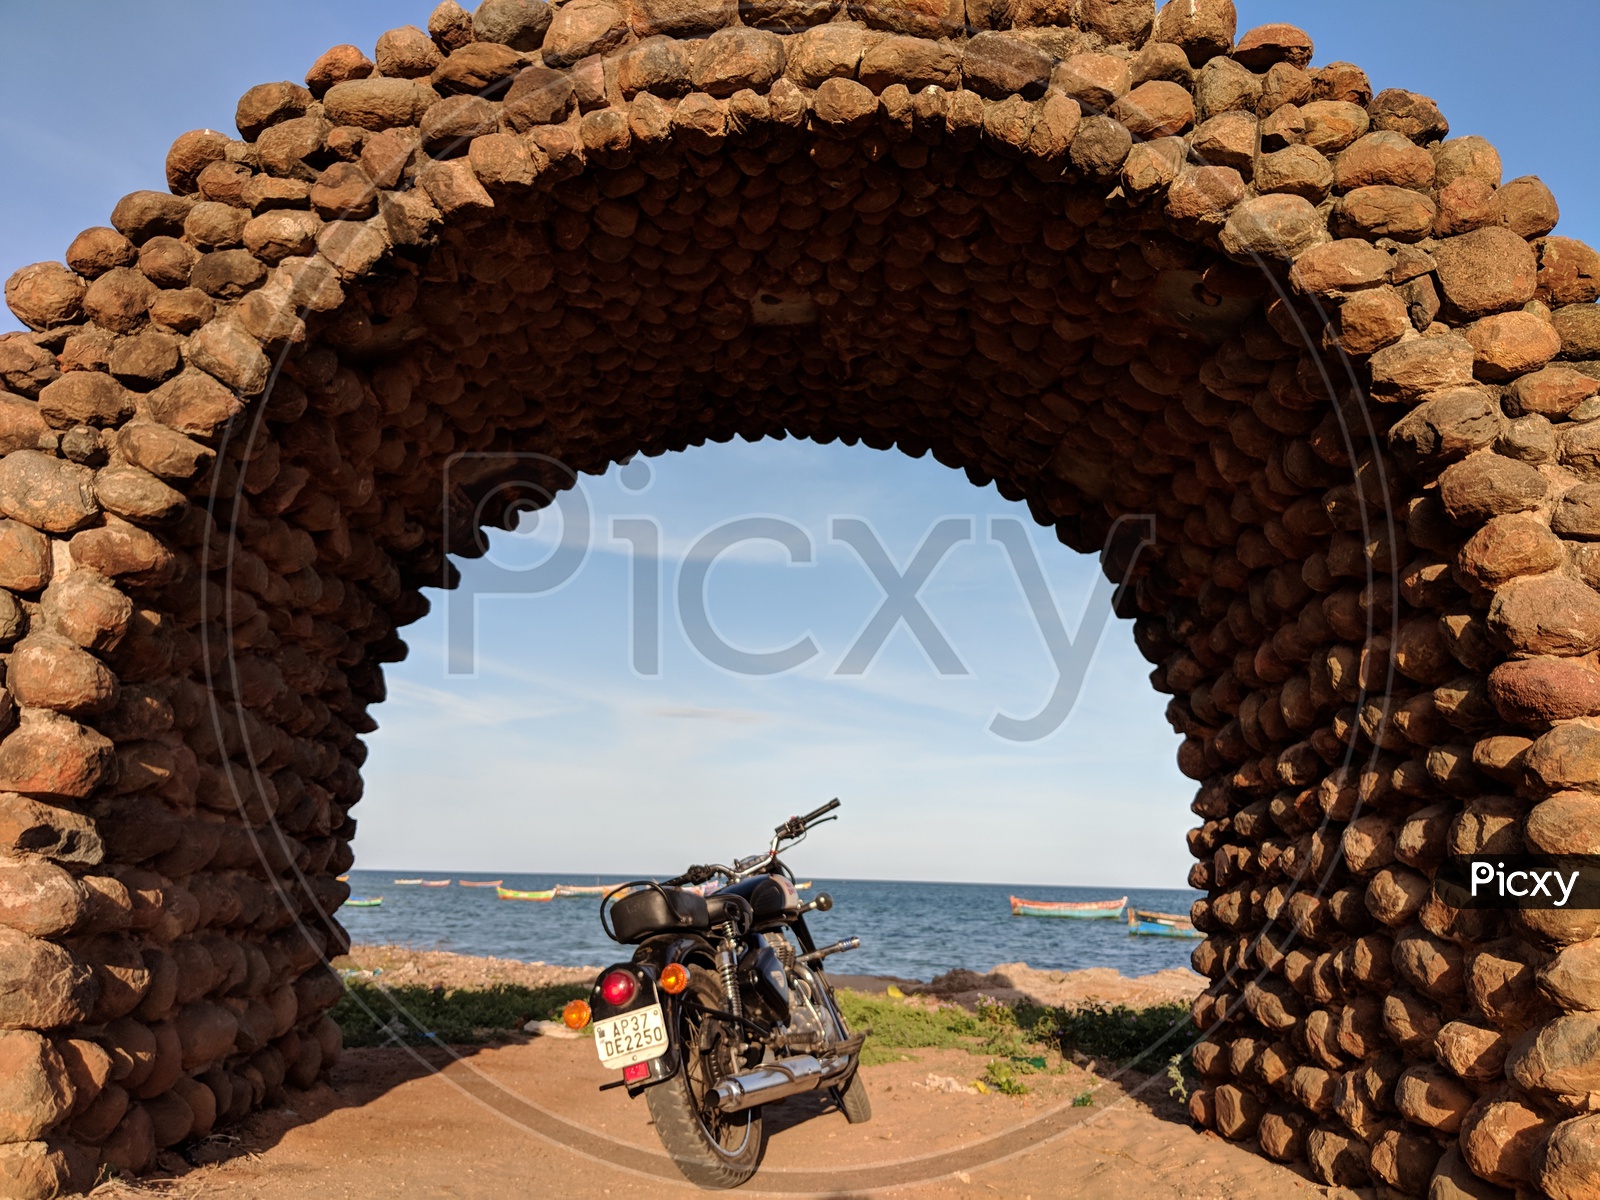 Royal Enfield Bike under a Stone Shade by the beach